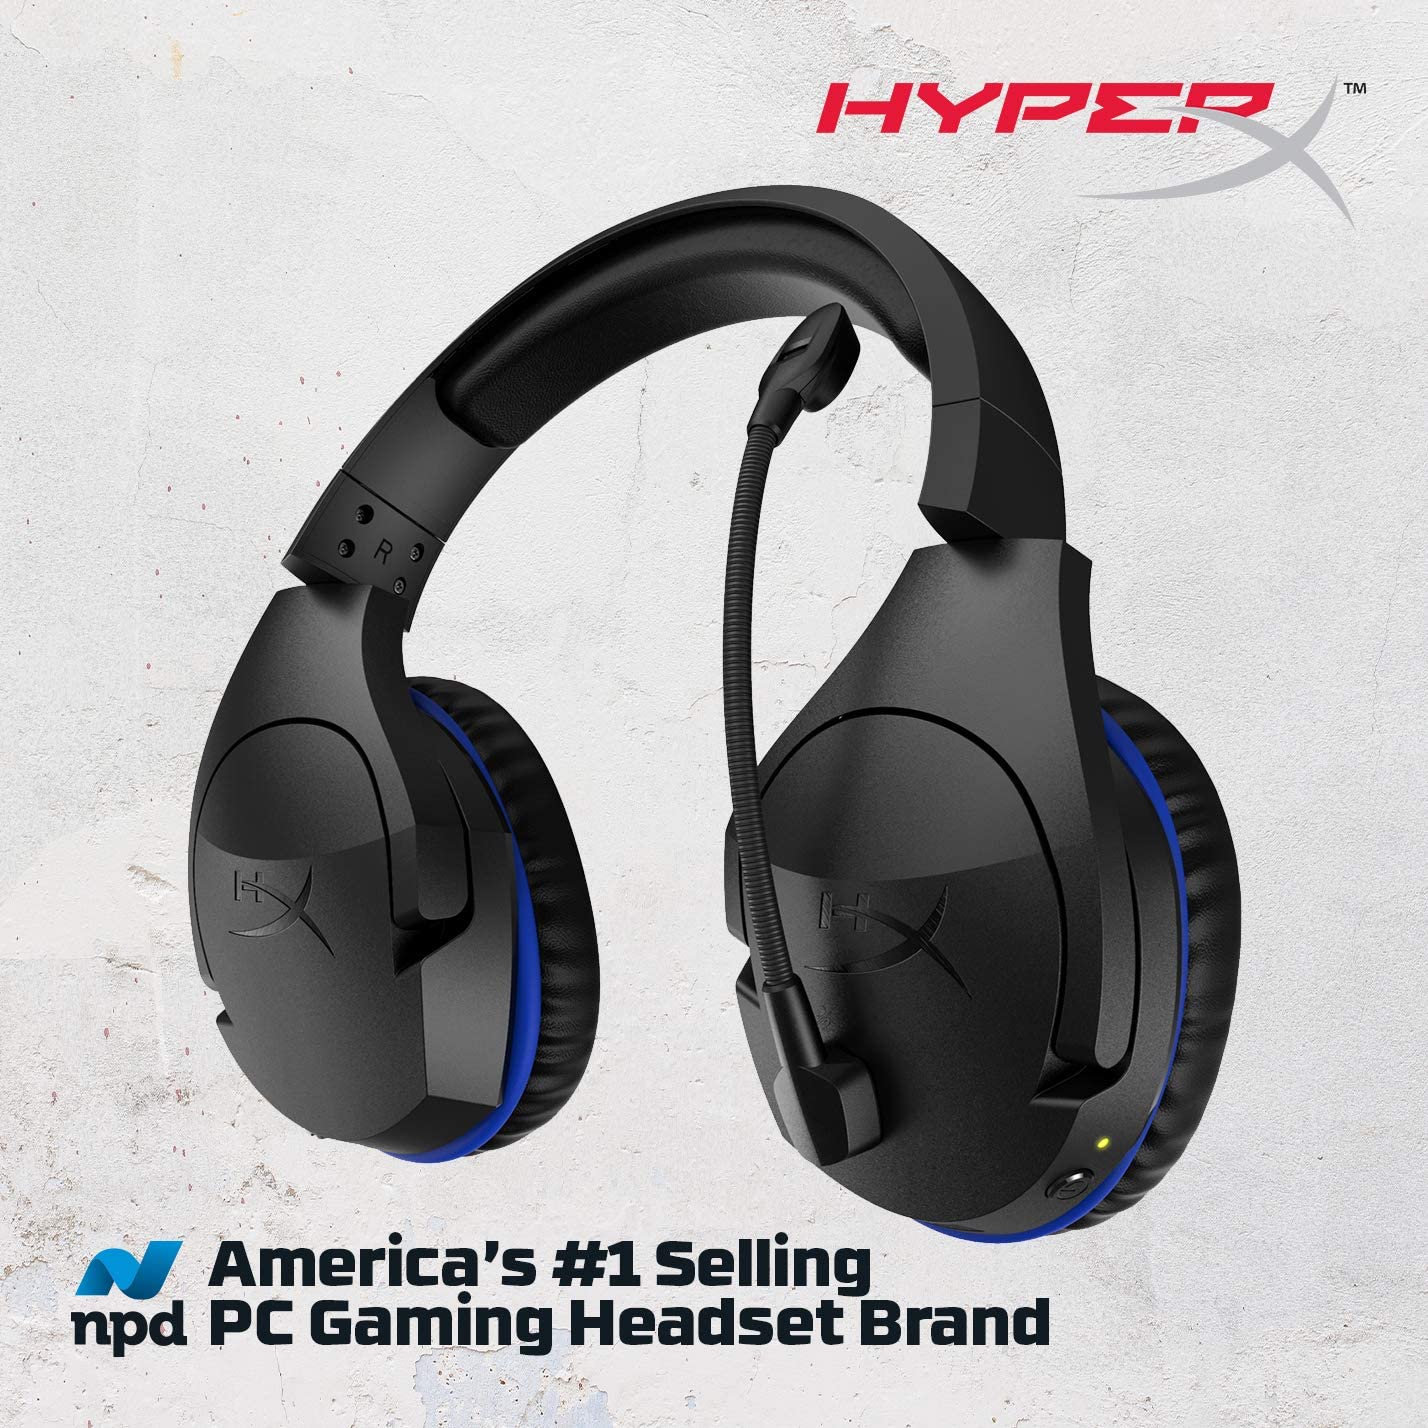 HyperX Cloud Stinger Wireless Gaming Headset for PS4 - Black - New